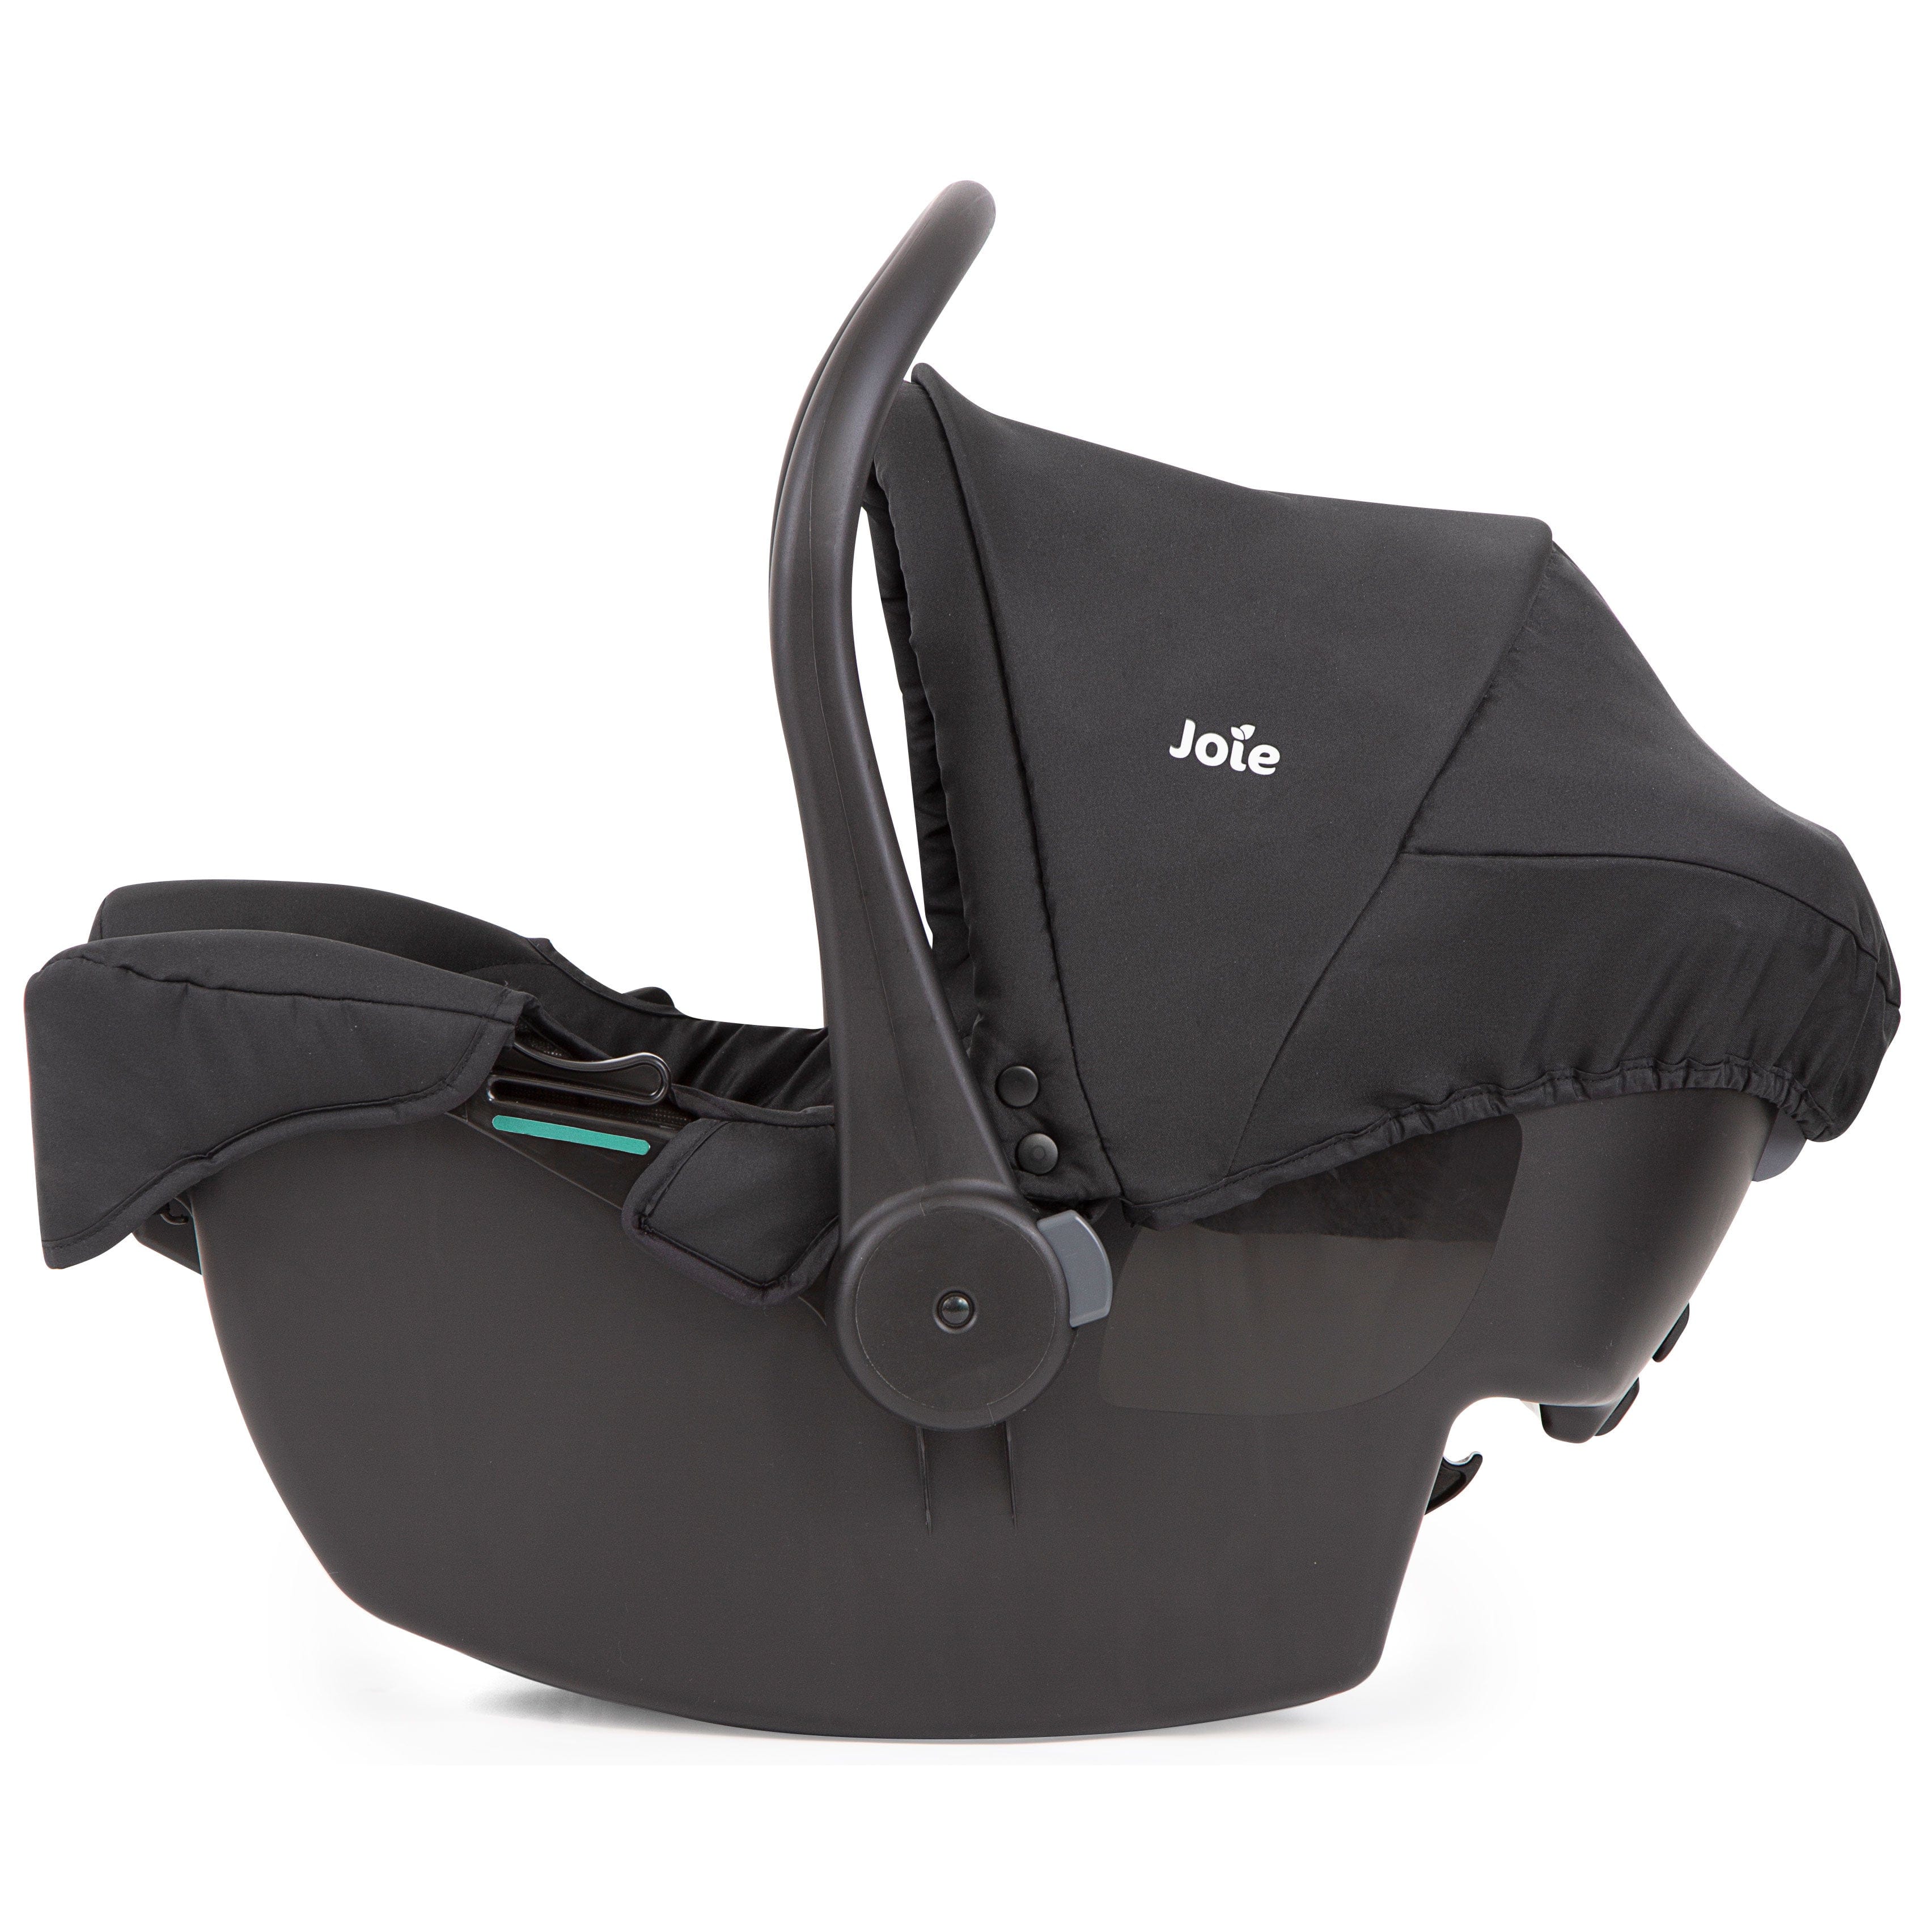 Joie i-Juva R129 i-Size Infant Carrier in Shale Baby Carriers C2114AASHA000 5056080612638